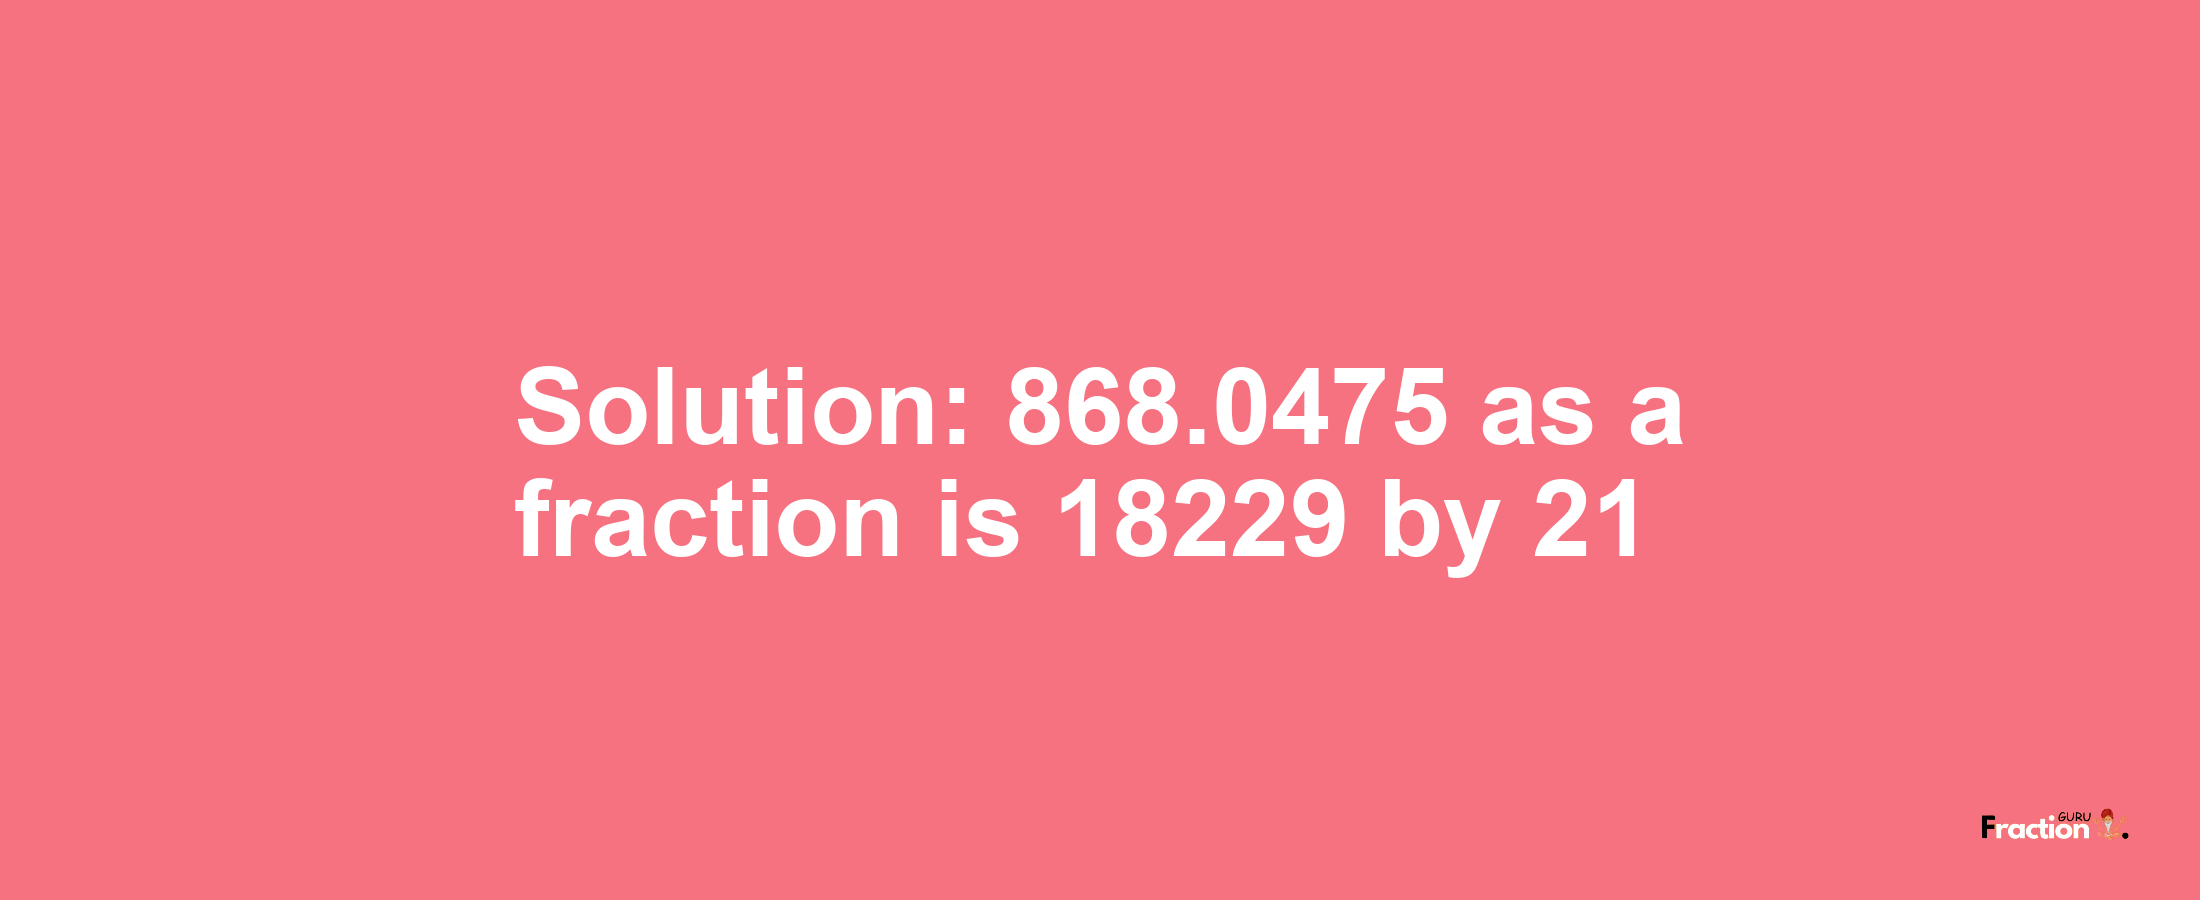 Solution:868.0475 as a fraction is 18229/21